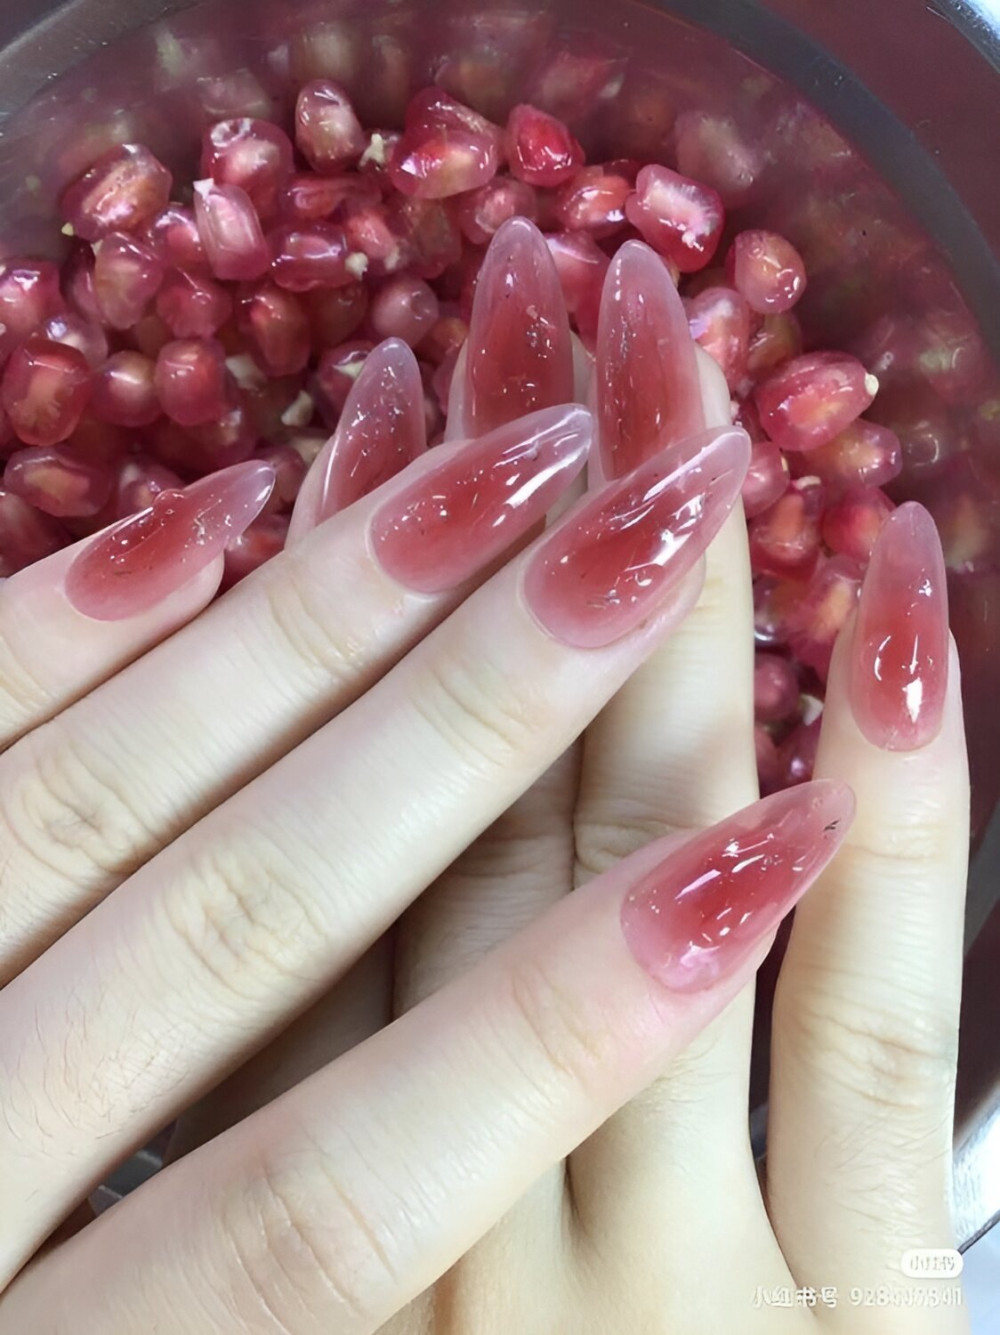 Trendy Jello Nails: A Playful And Translucent Delight - 241